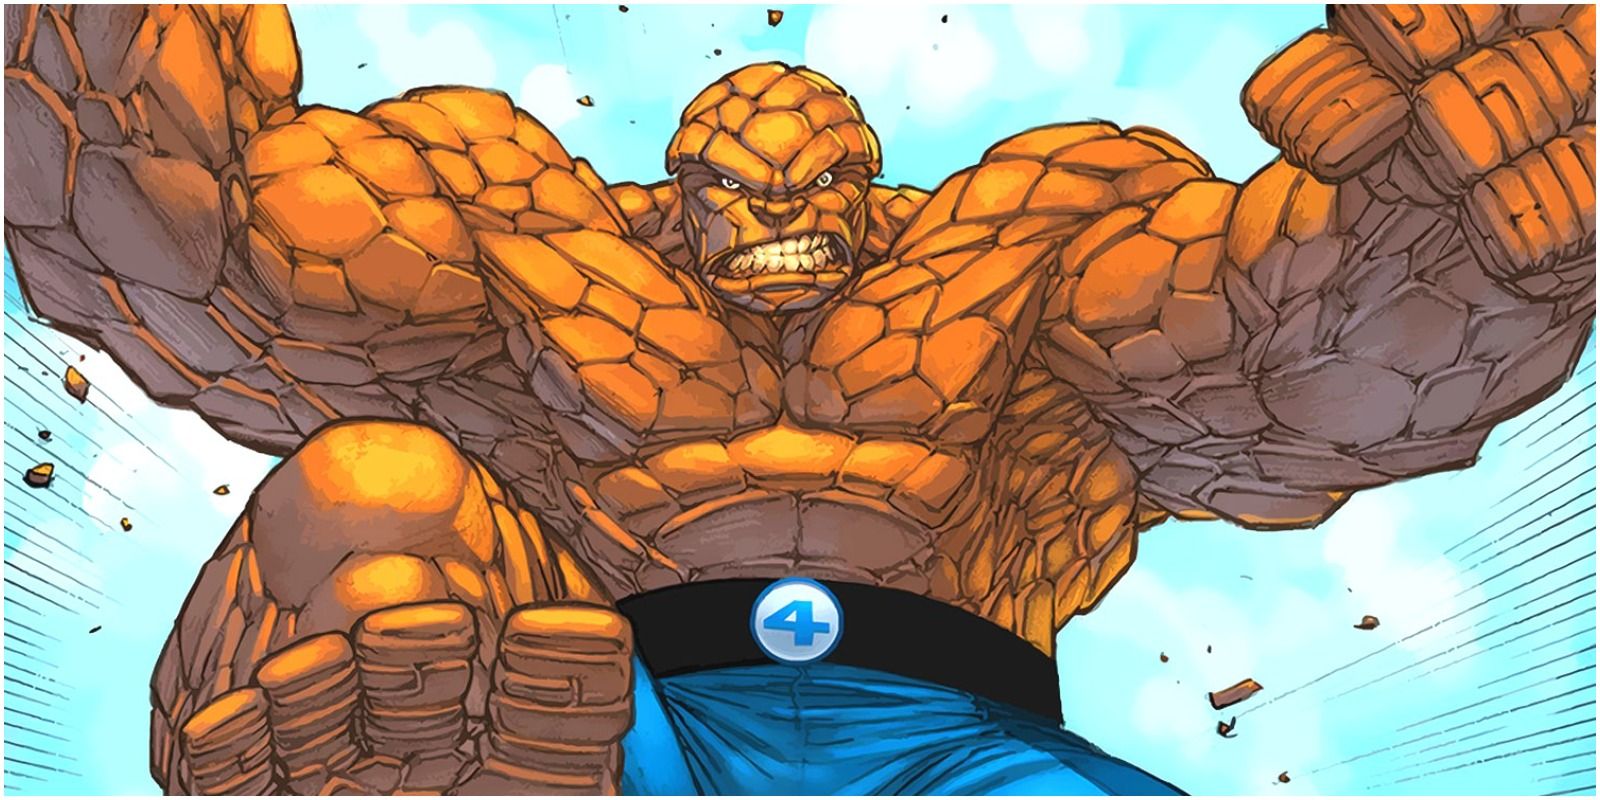 The Thing getting ready to fight with his FF uniform